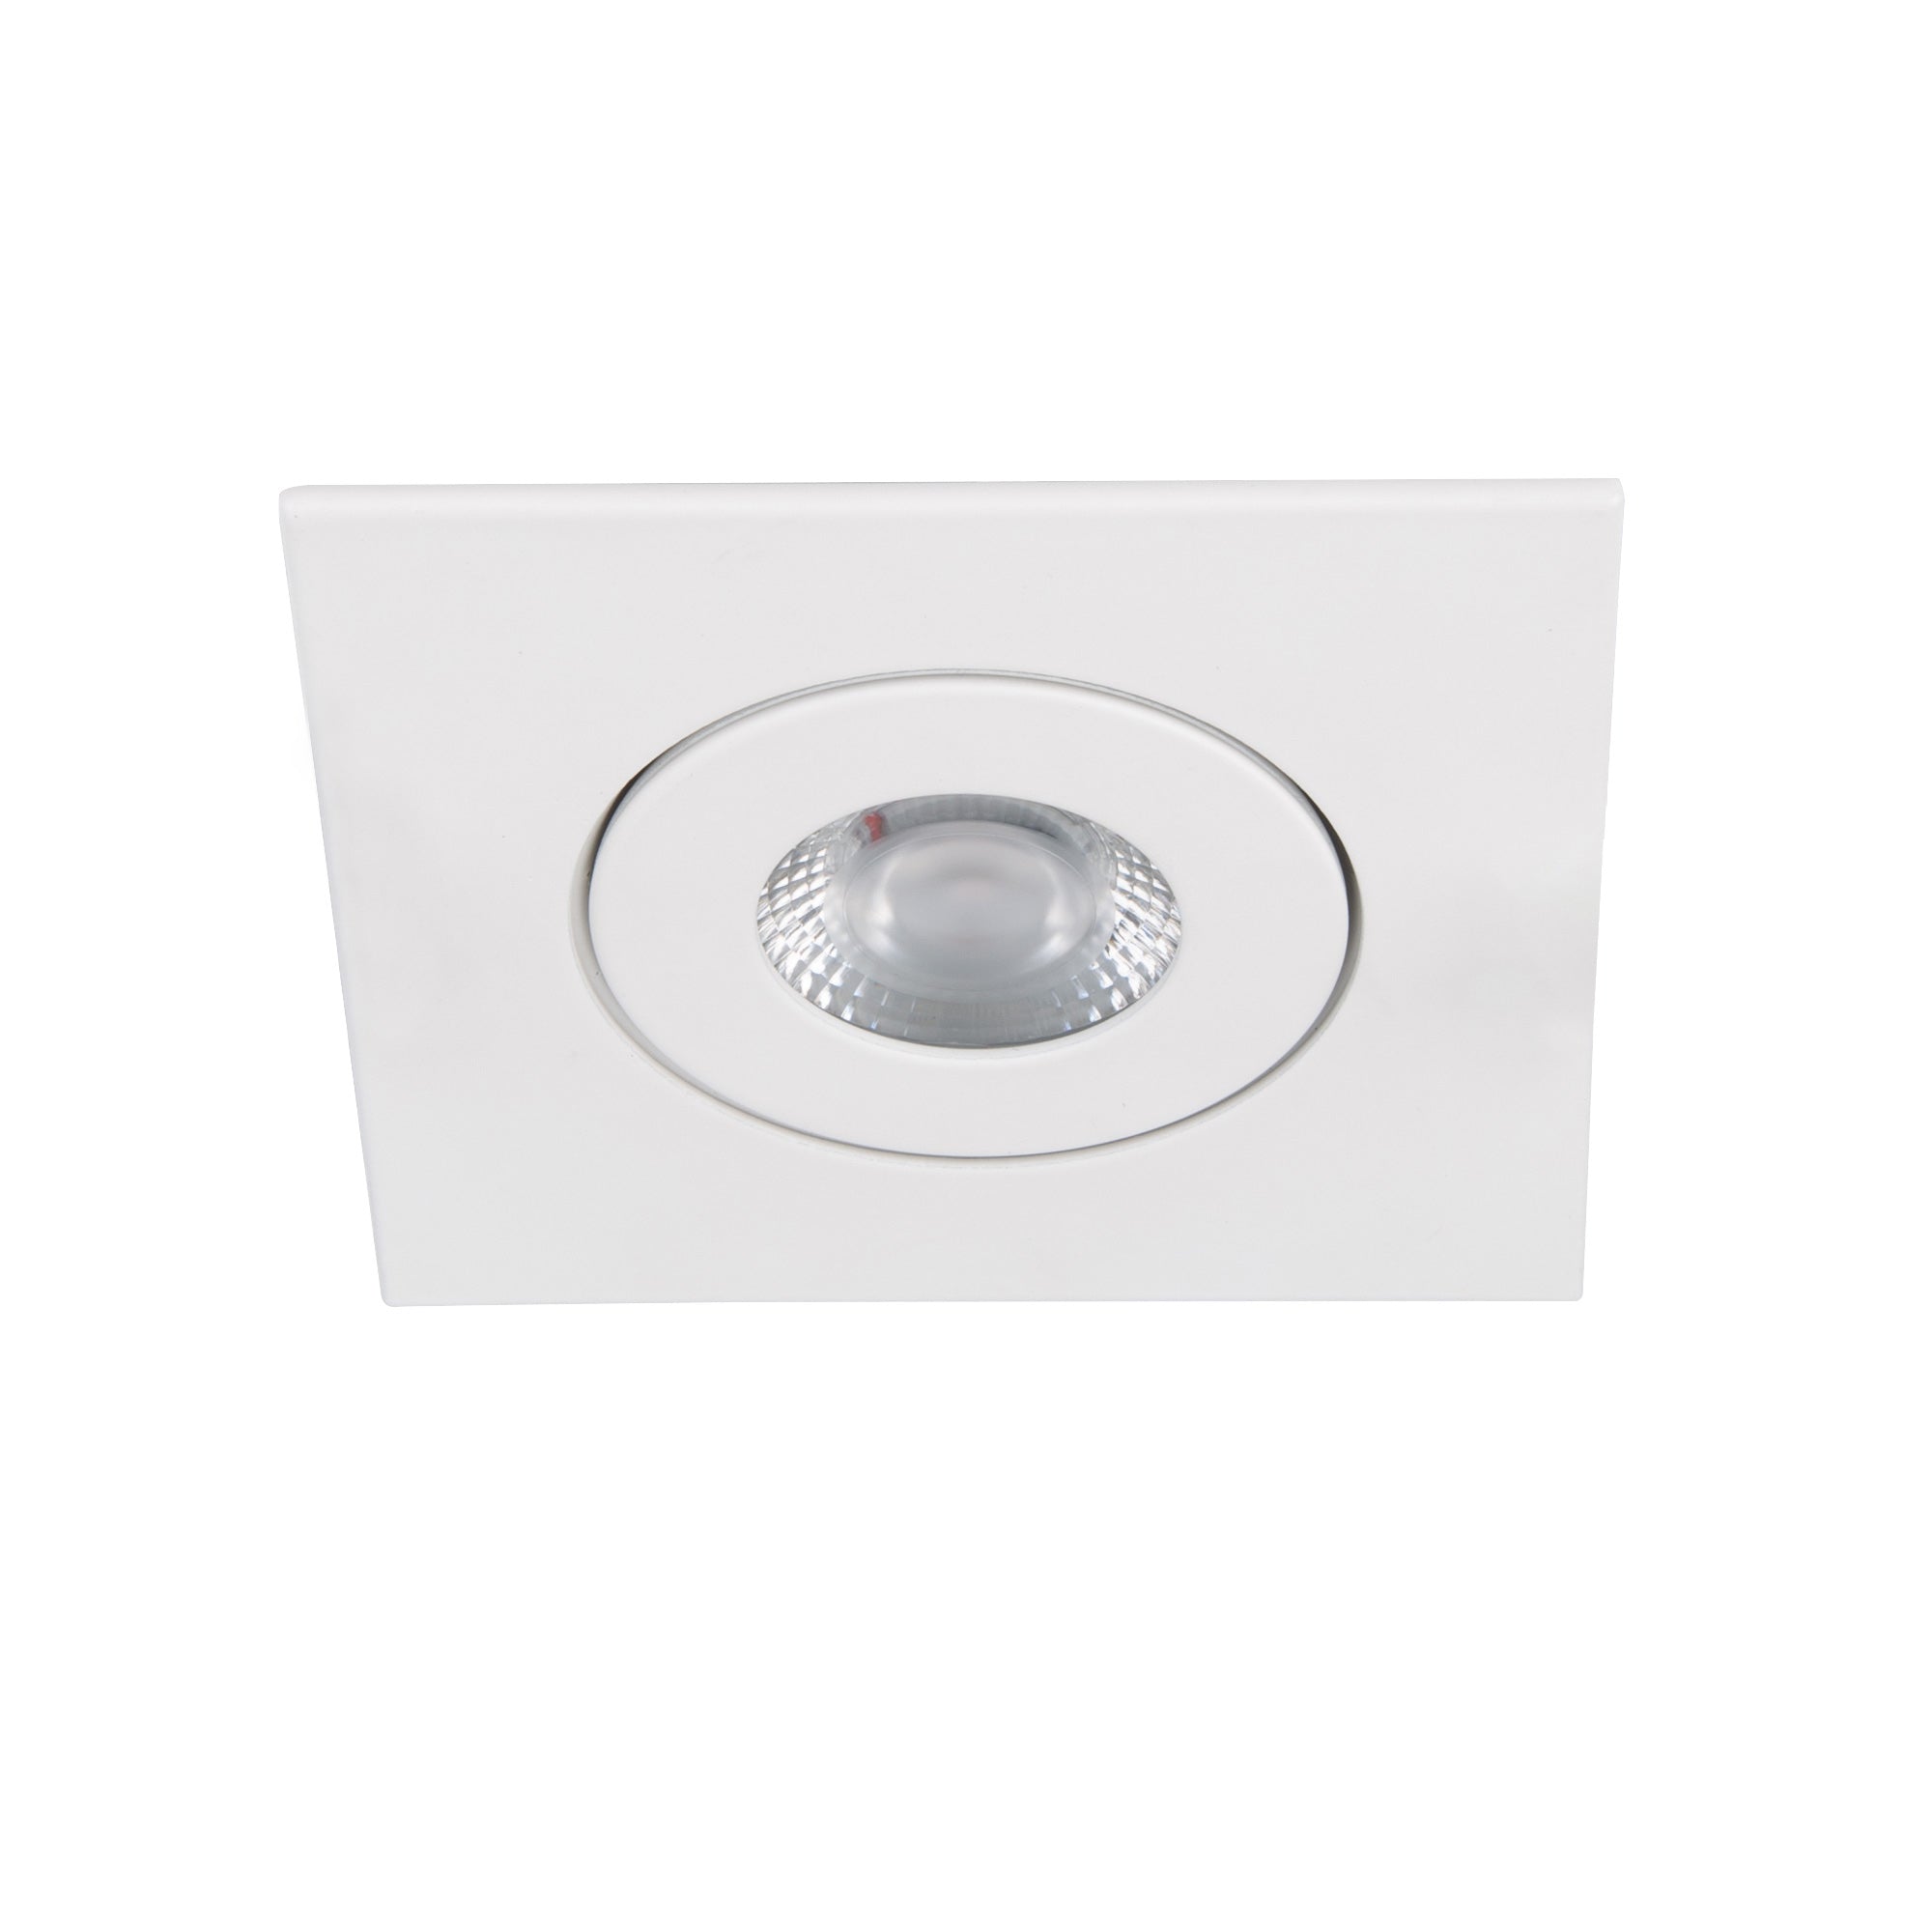 Lotos 2" LED 1-Light Square Adjustable Recessed Kit (Pack of 6)